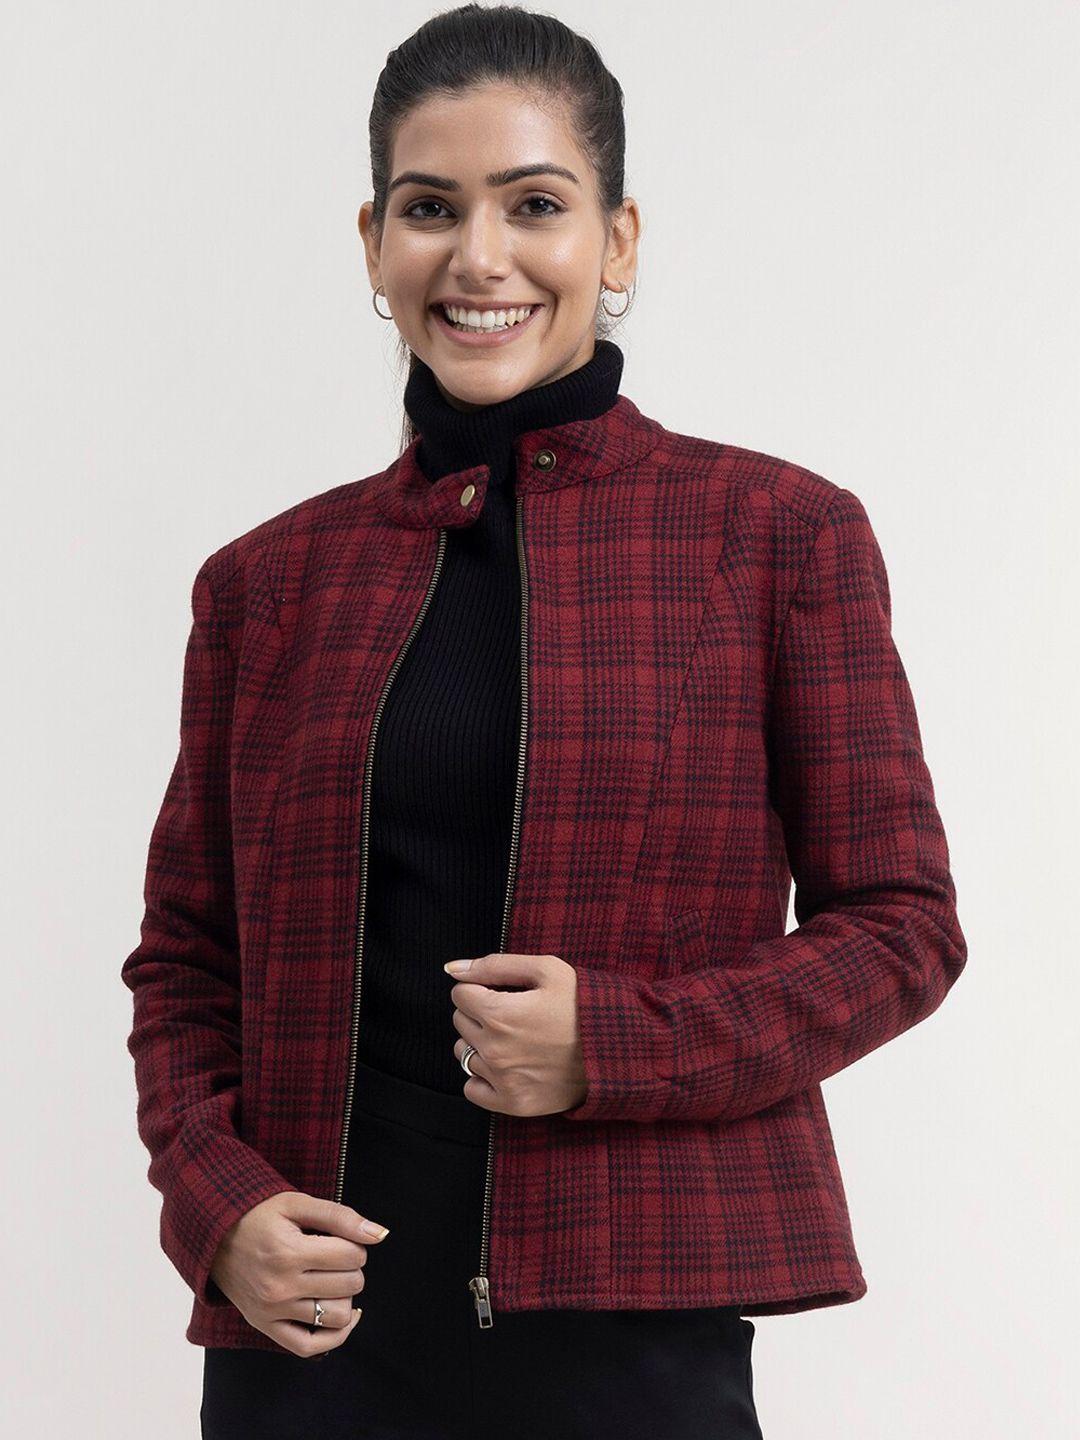 fablestreet women maroon navy blue checked tailored jacket